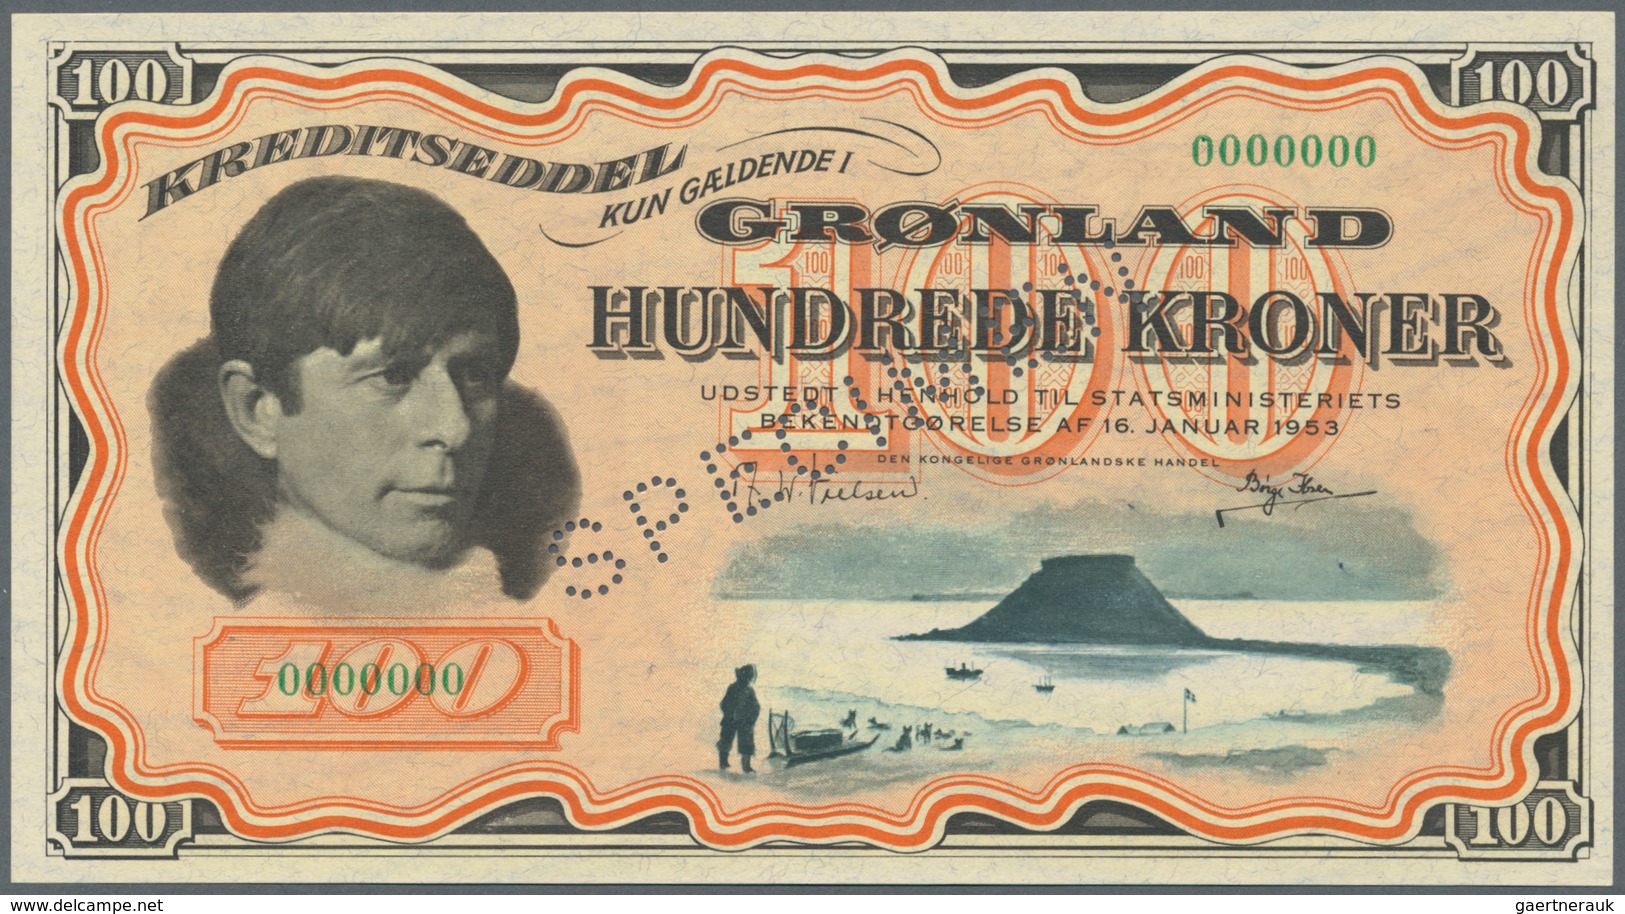 01652 Greenland / Grönland: 100 Kroner 1953 SPECIMEN, P.21as, Tiny Creases In The Paper, Otherwise Perfect - Greenland